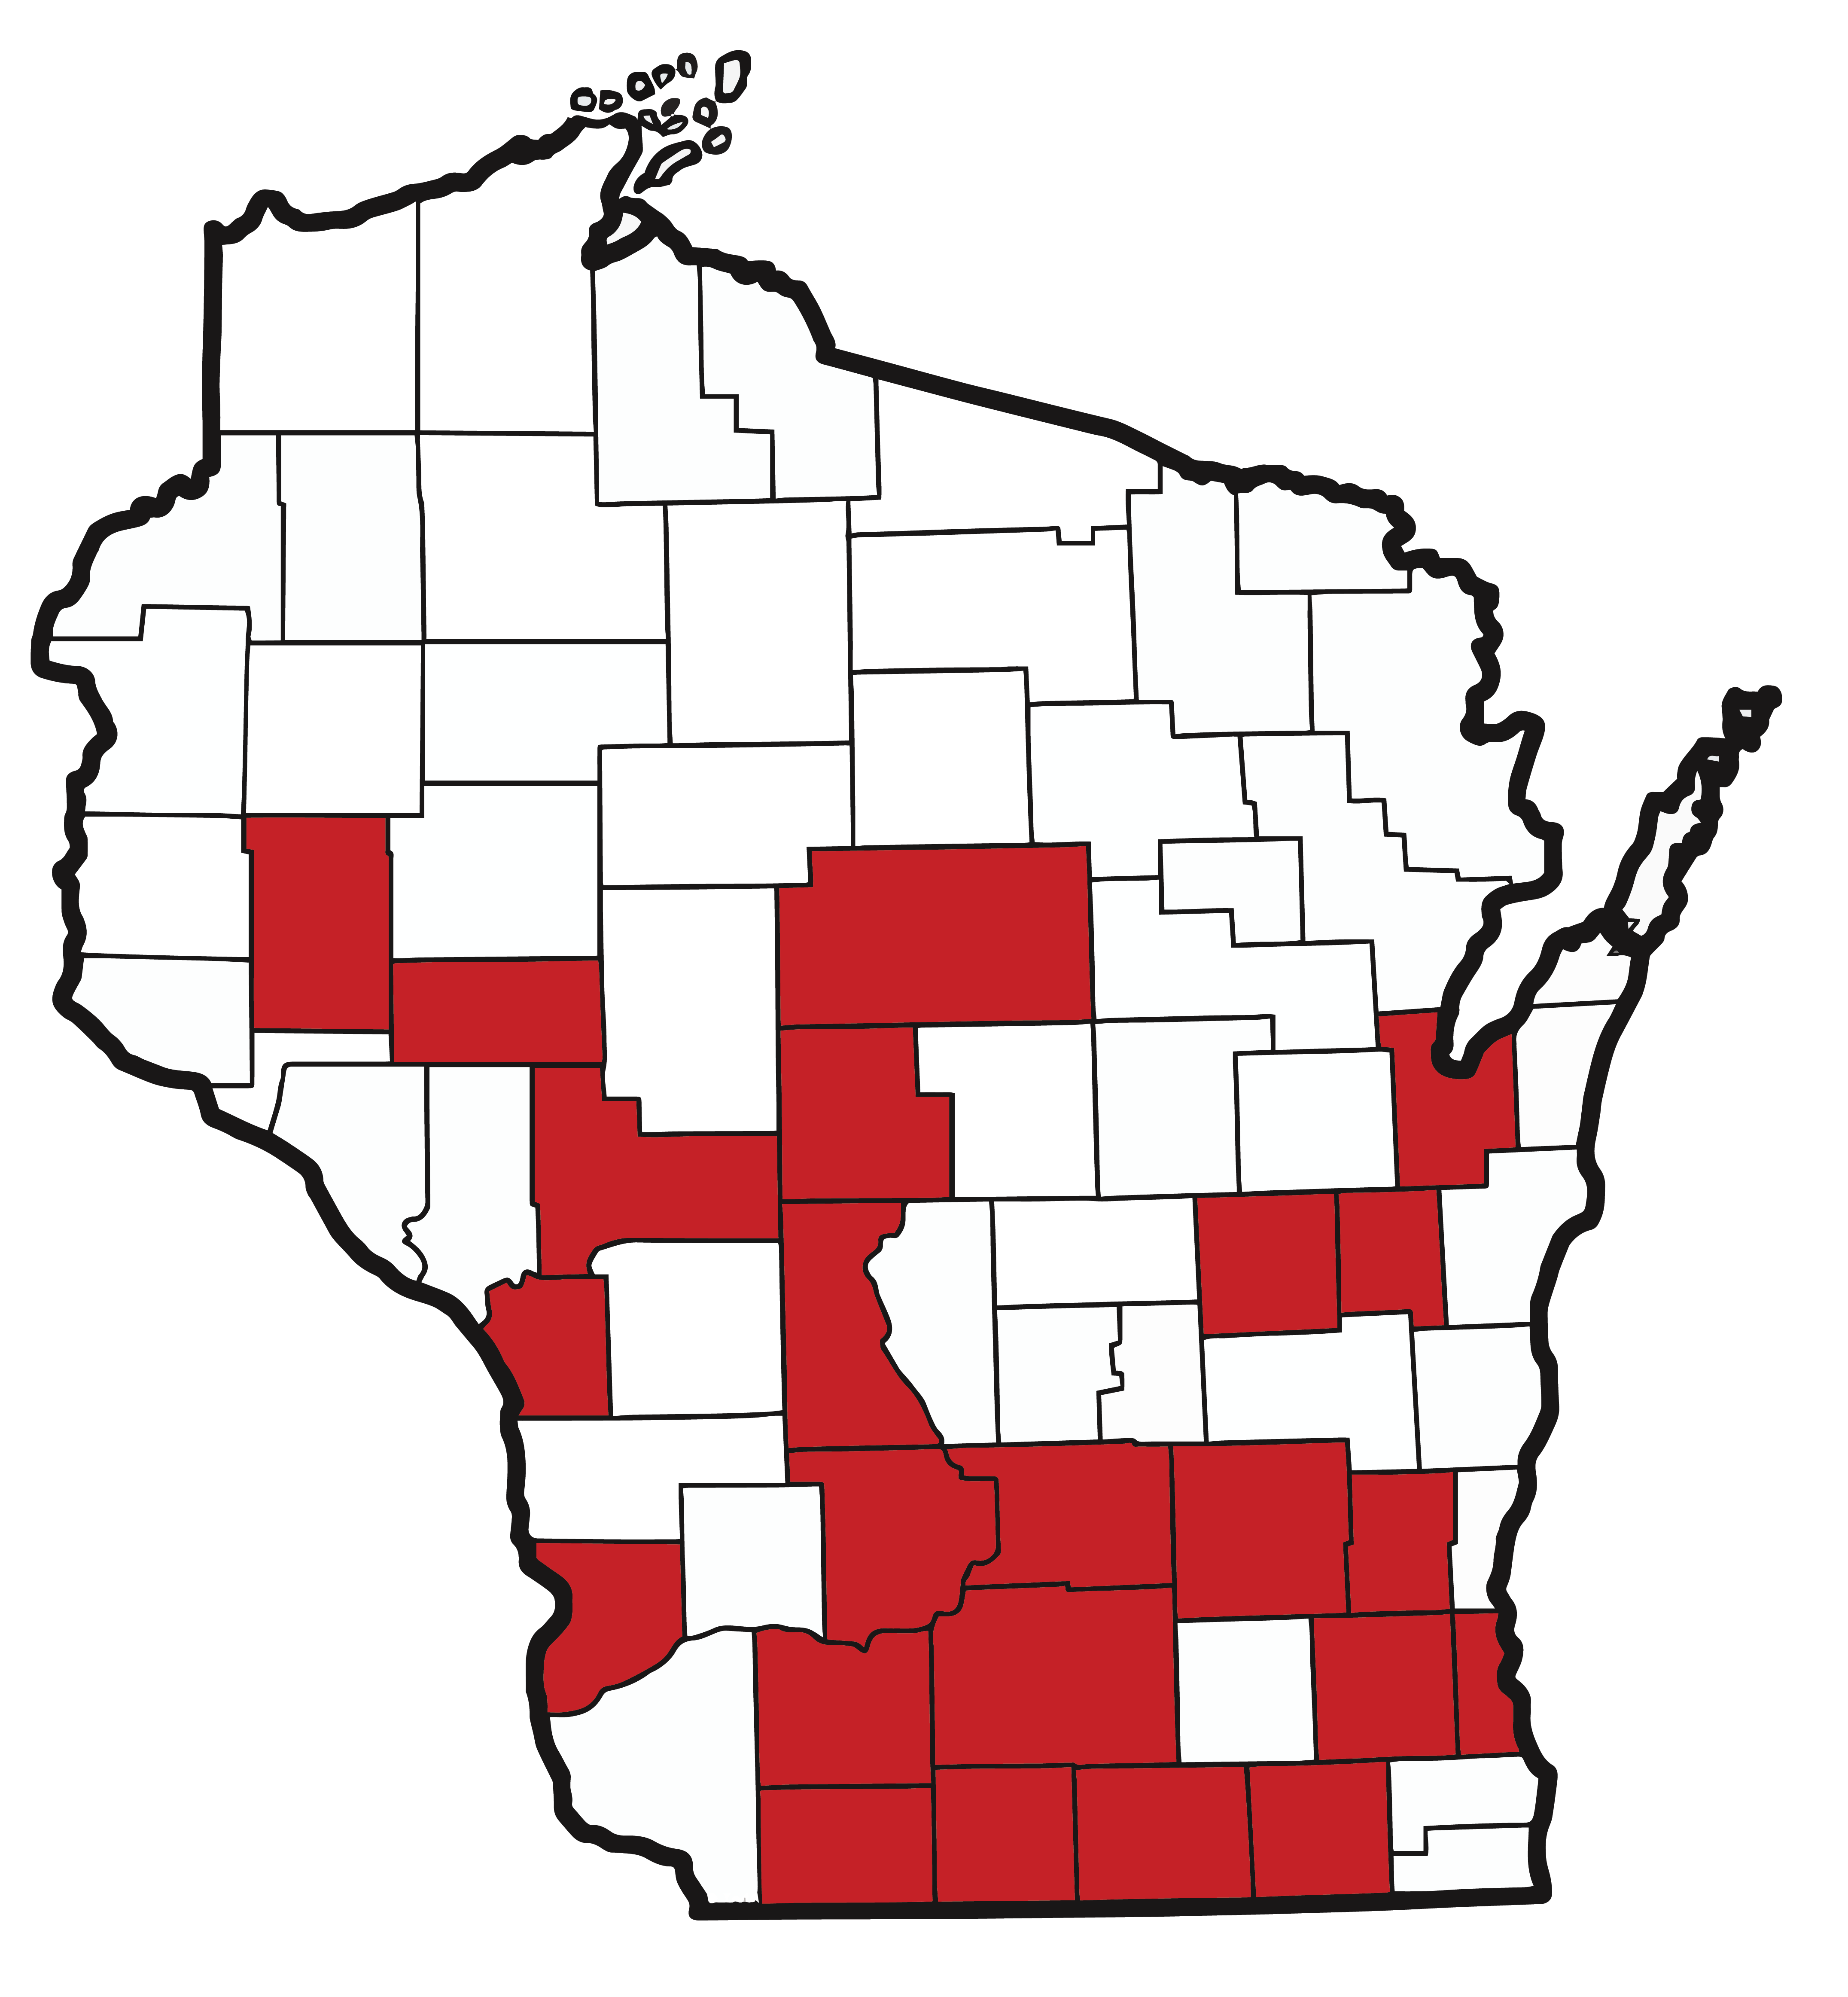 a map of the state of Wisconsin with counties outlined. Counties that have been visited are colored red